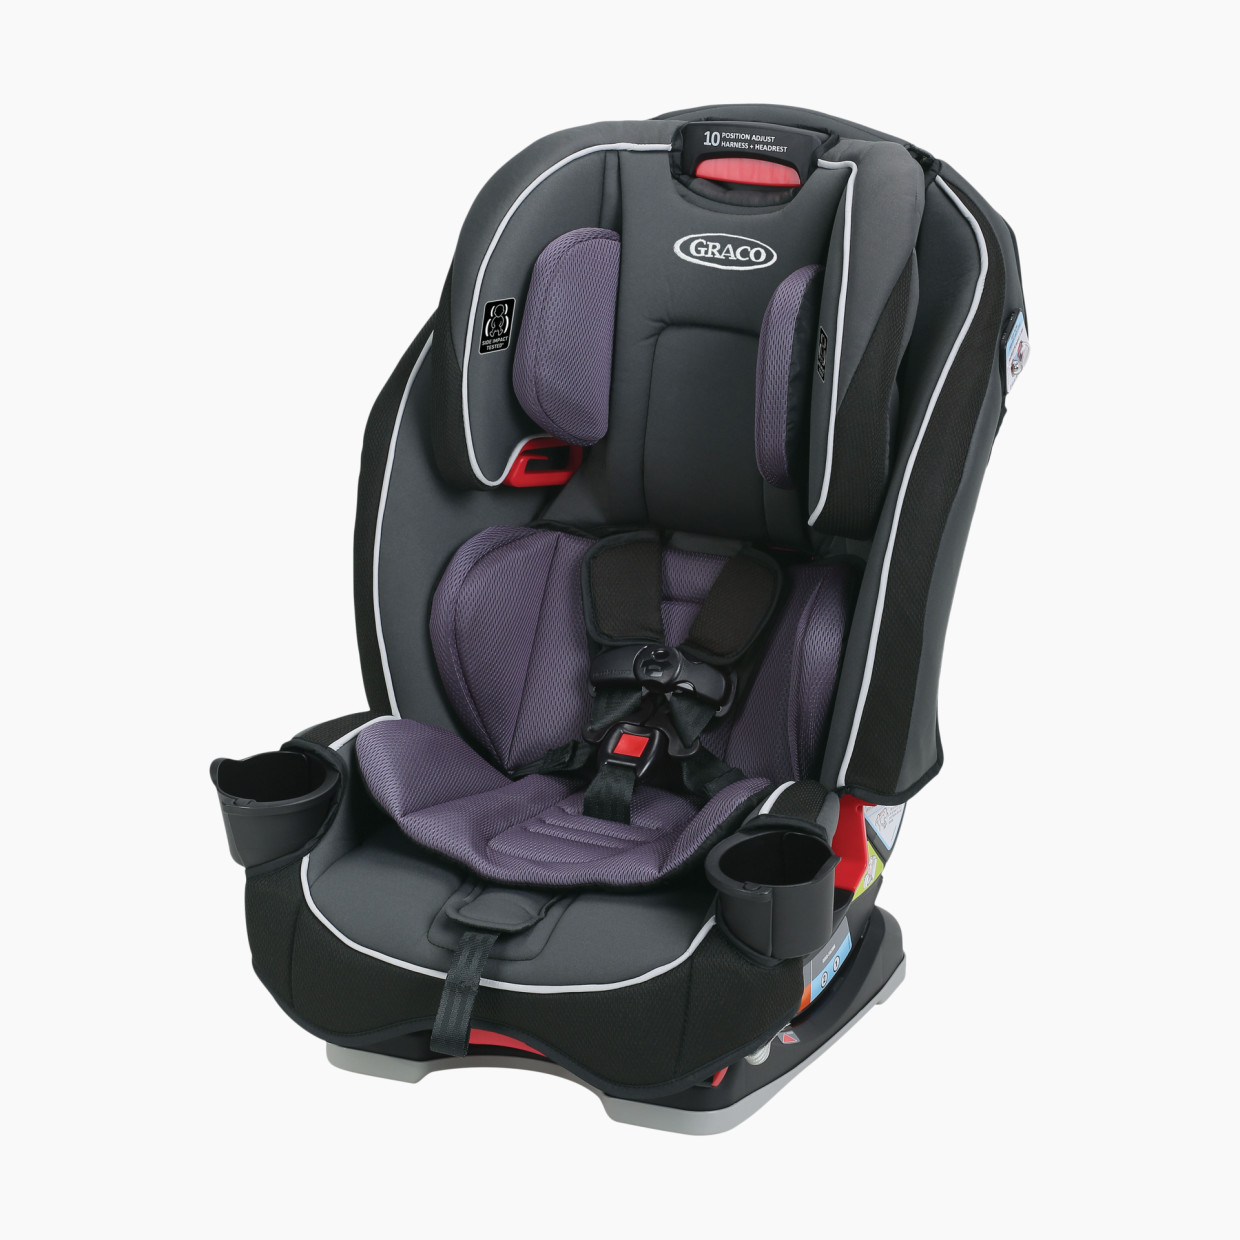 Graco SlimFit All-in-One Convertible Car Seat - Anabele.